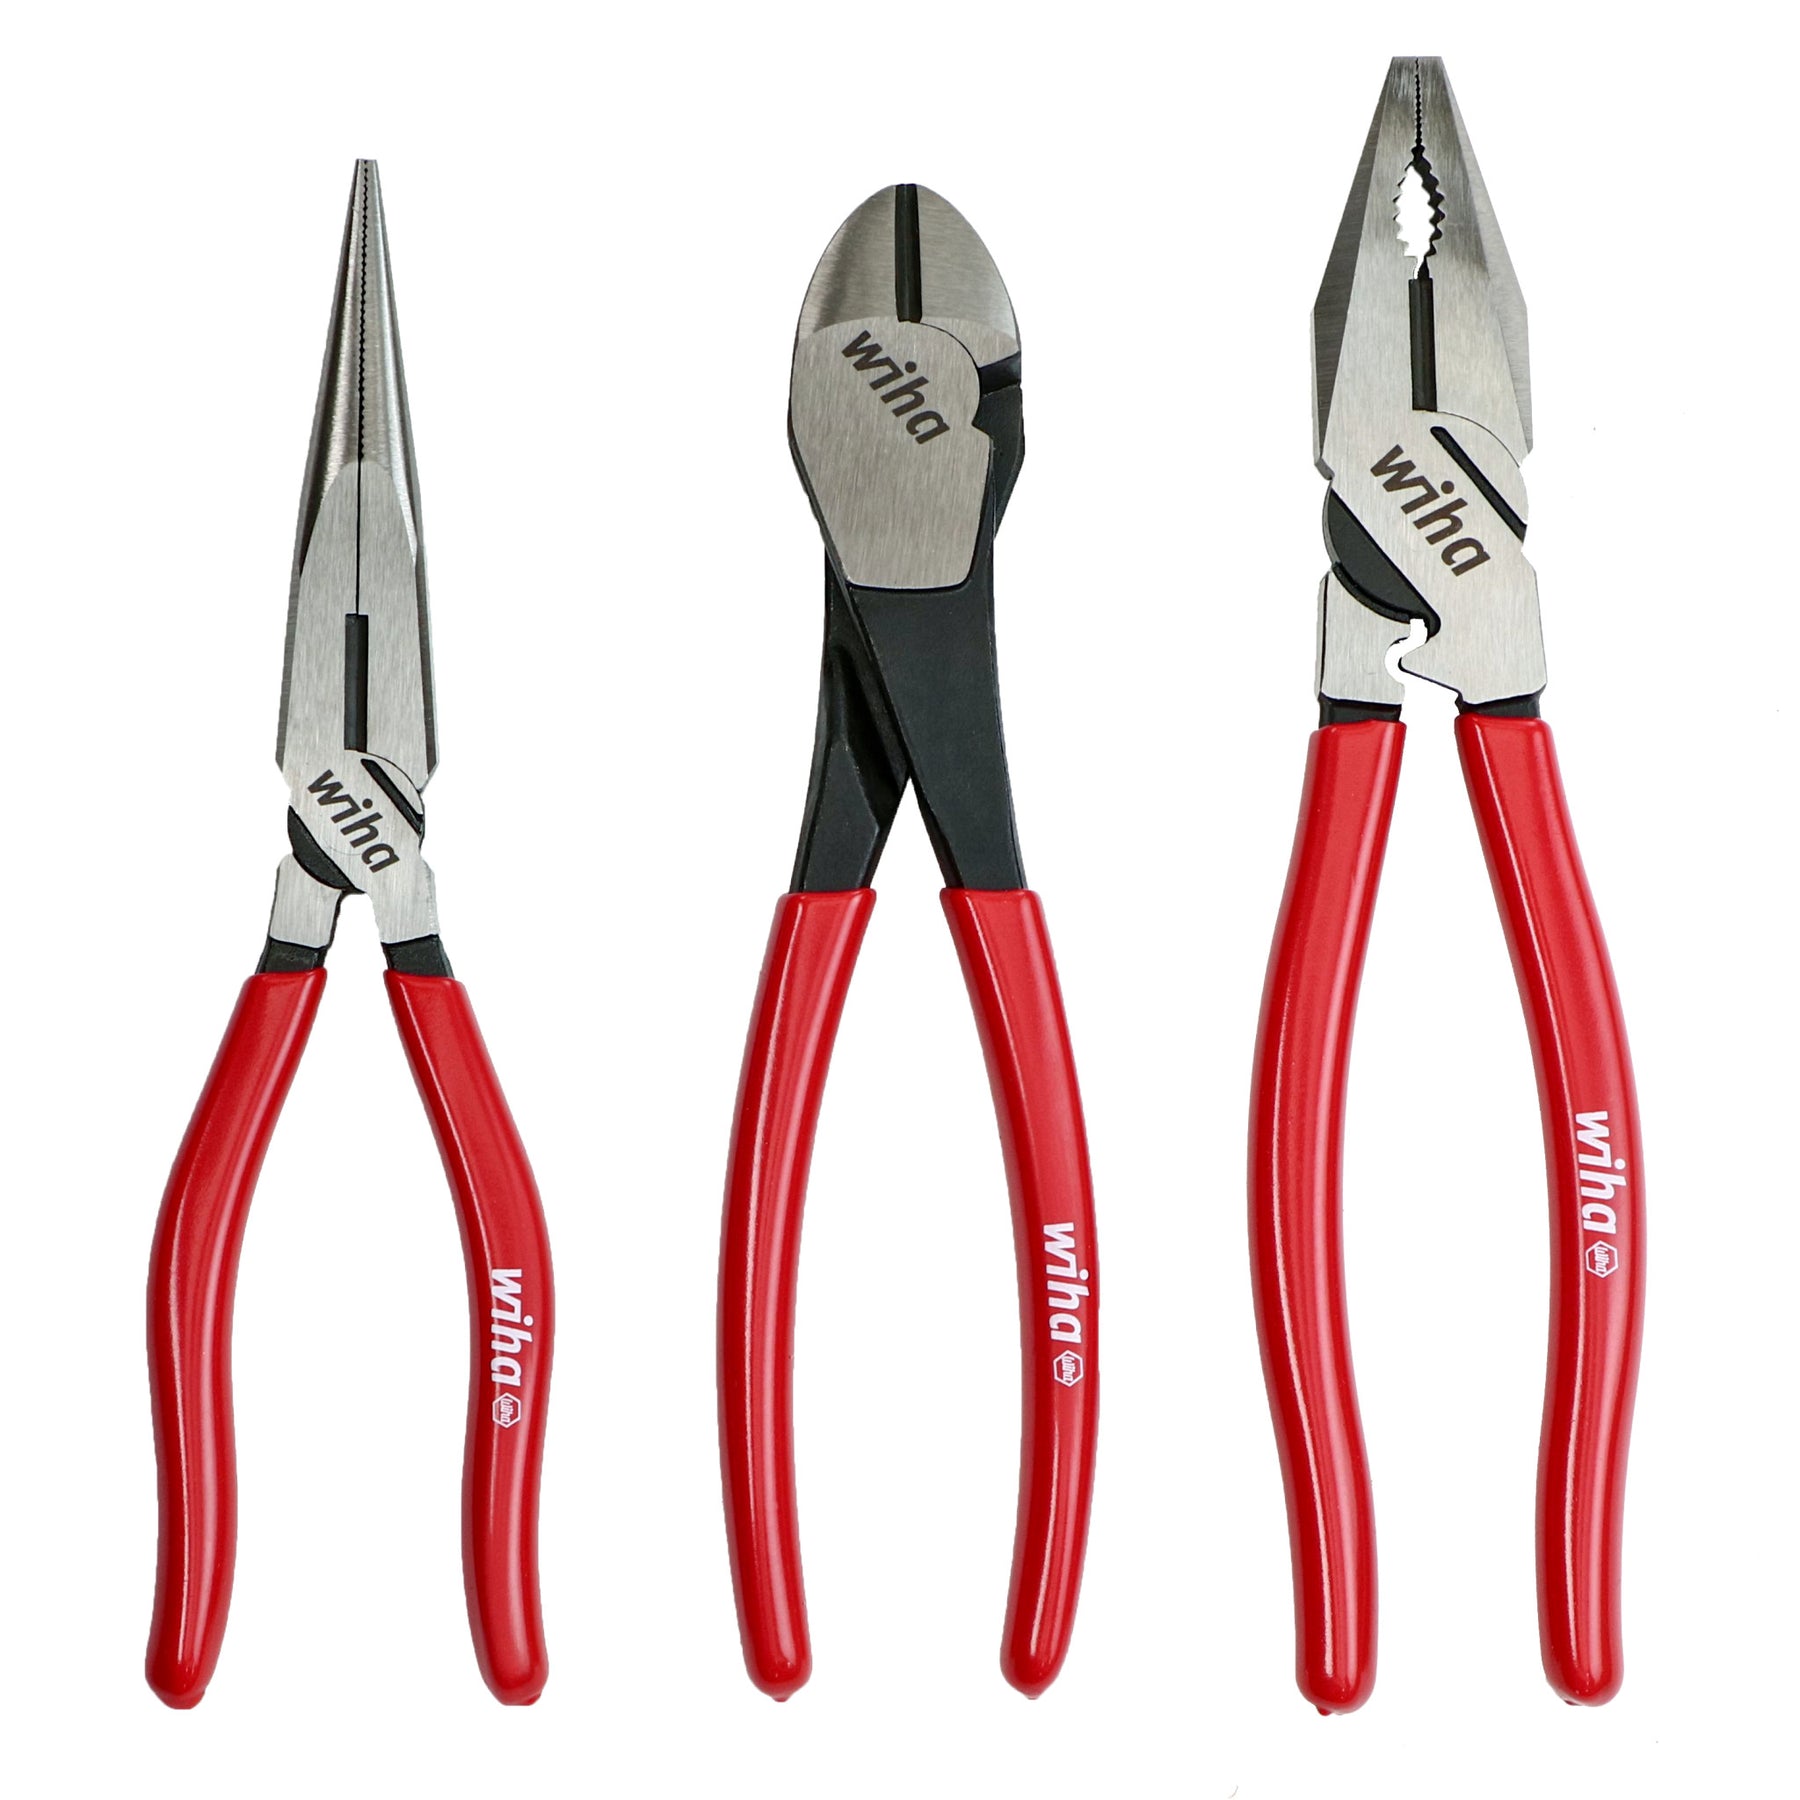 Wiha 34682 - 8 Piece Classic Grip Pliers and Cutters Tray Set